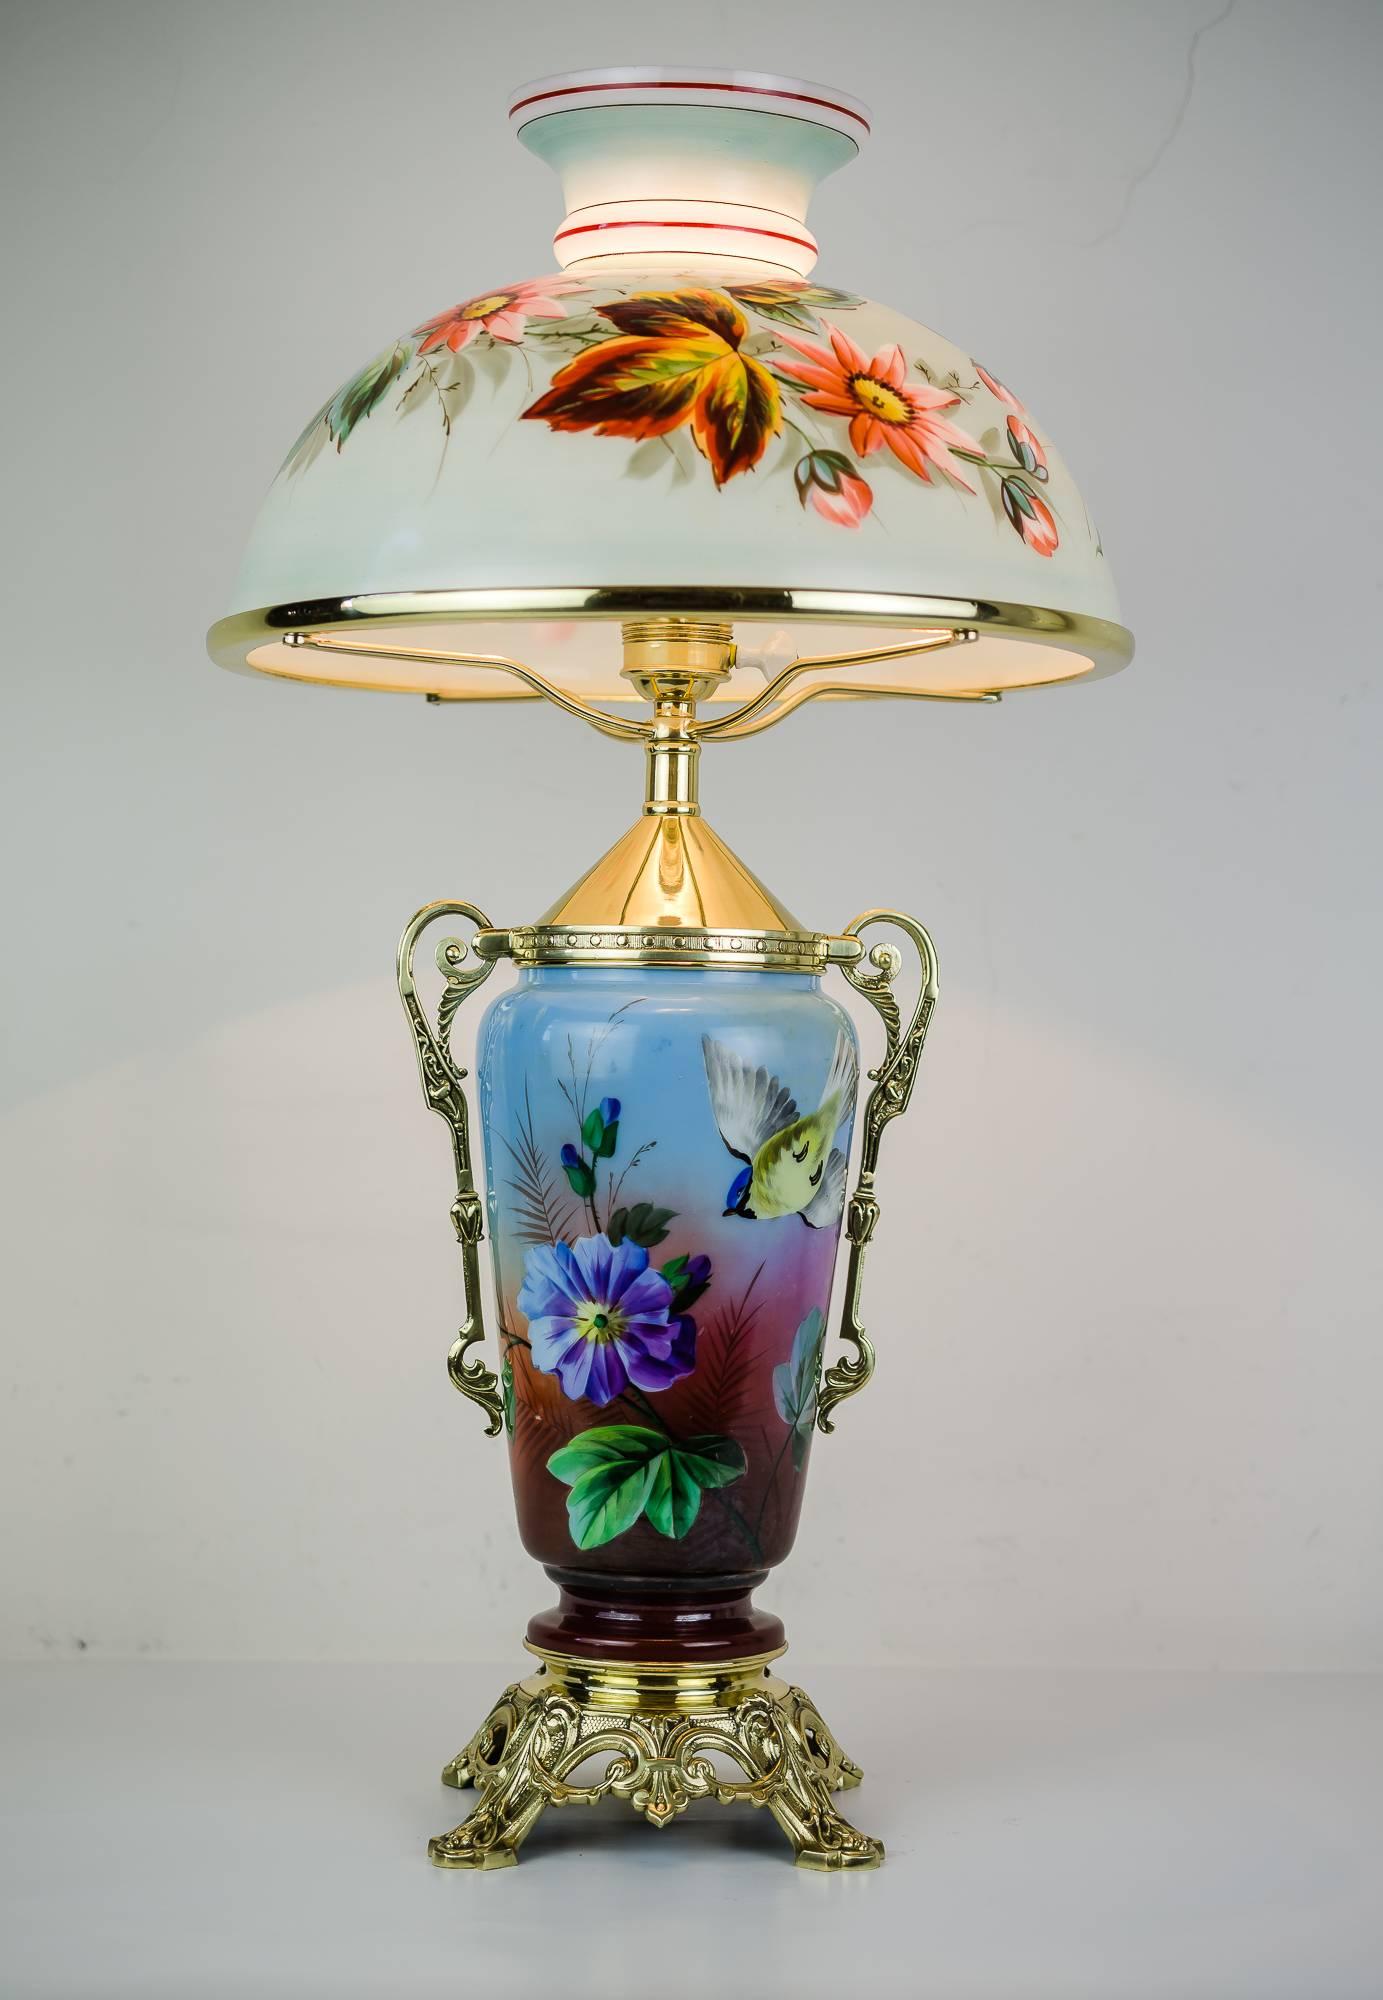 Historistic table lamp, circa 1890s.
Original glass shade.
Brass parts polished and stove enamelled.
 